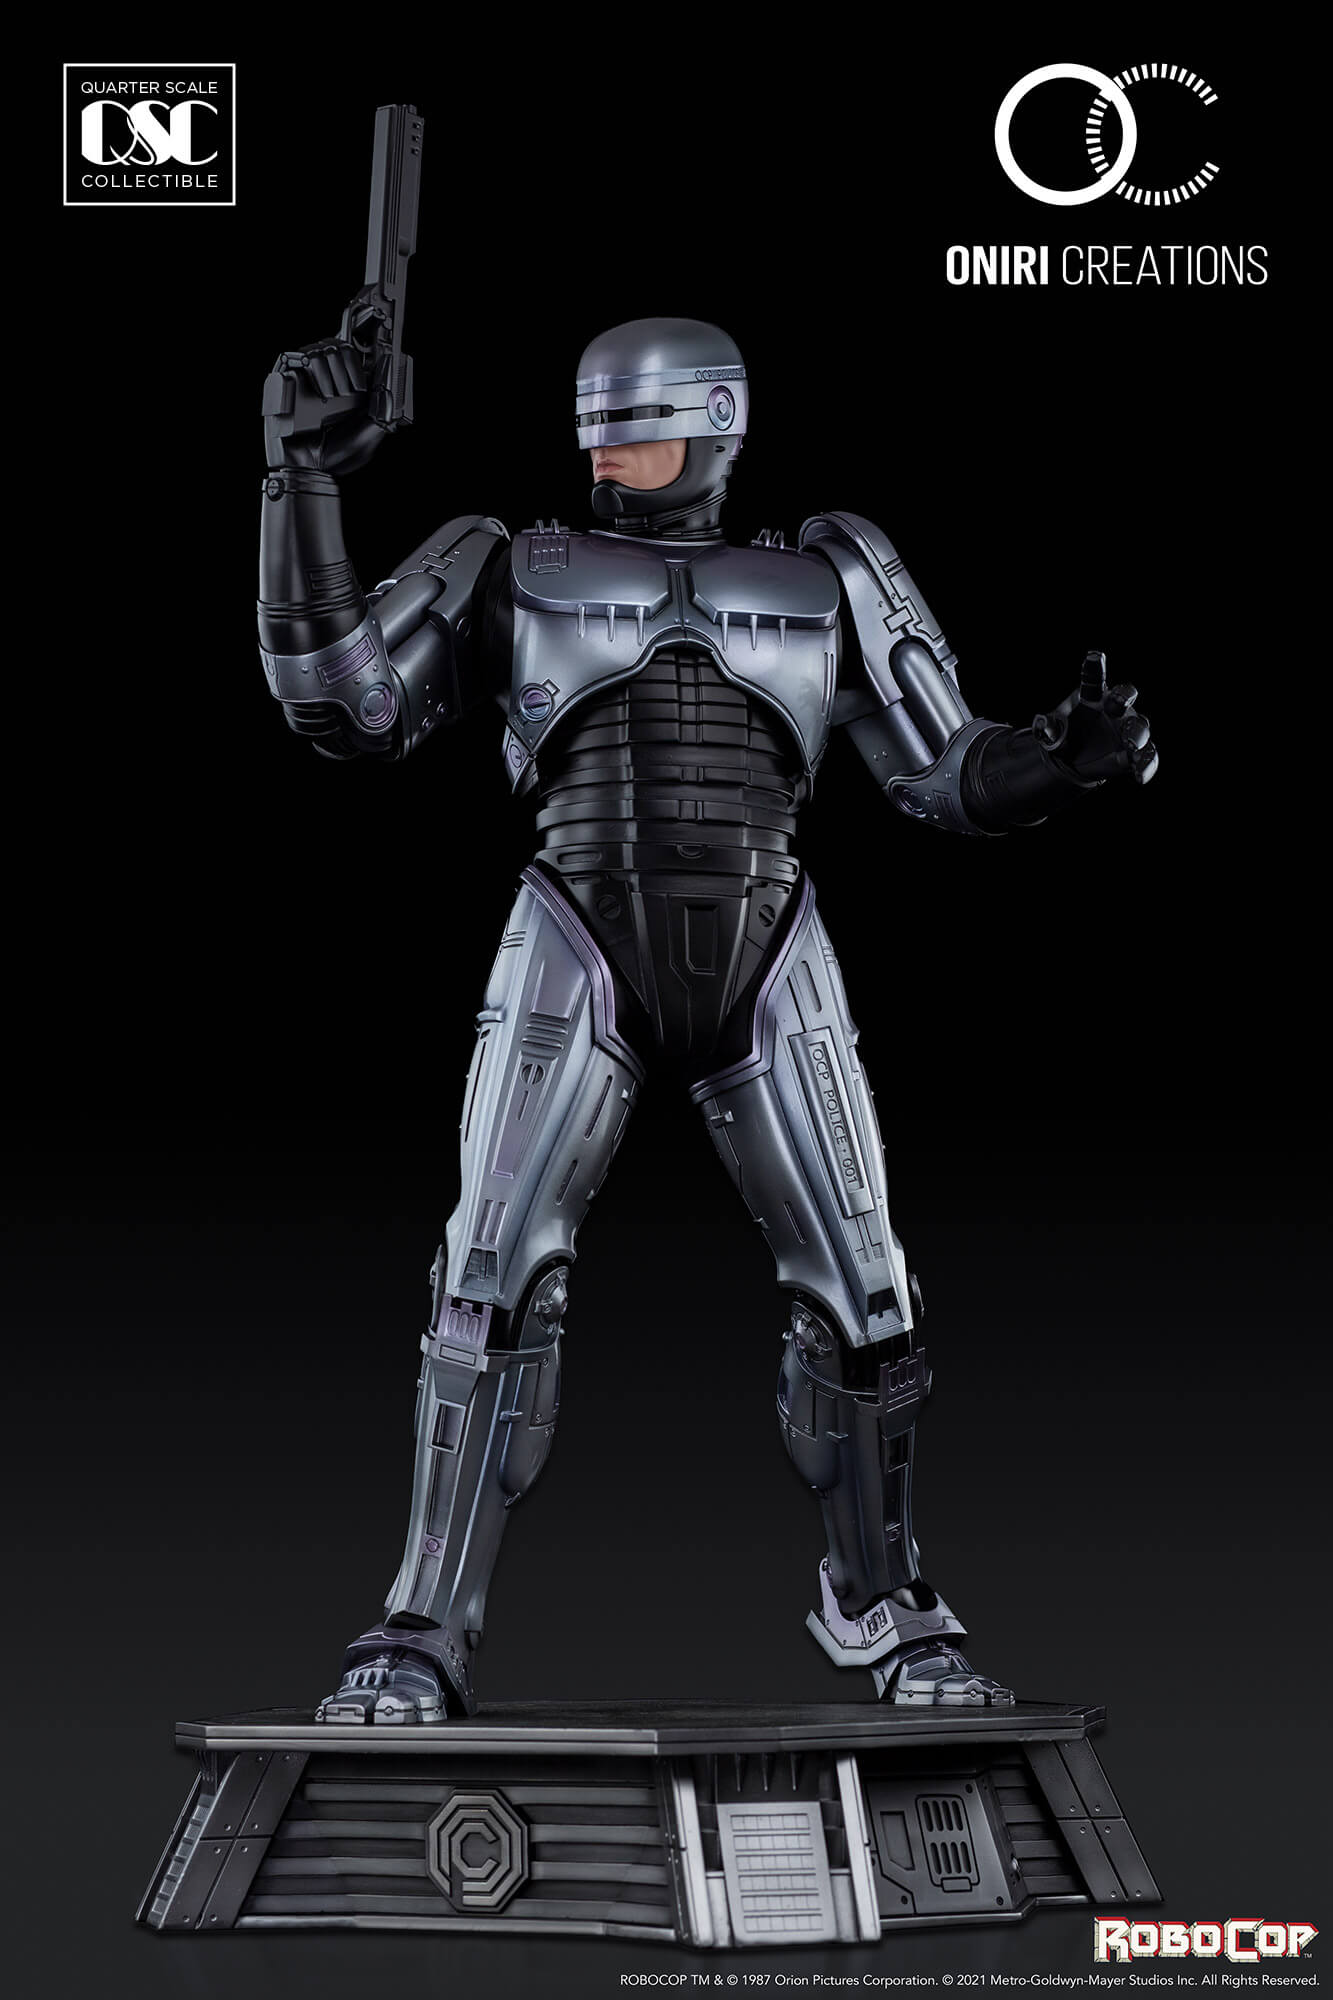 robocop, Statue 75mm - ForgeLord.3D Fantasy Miniatures